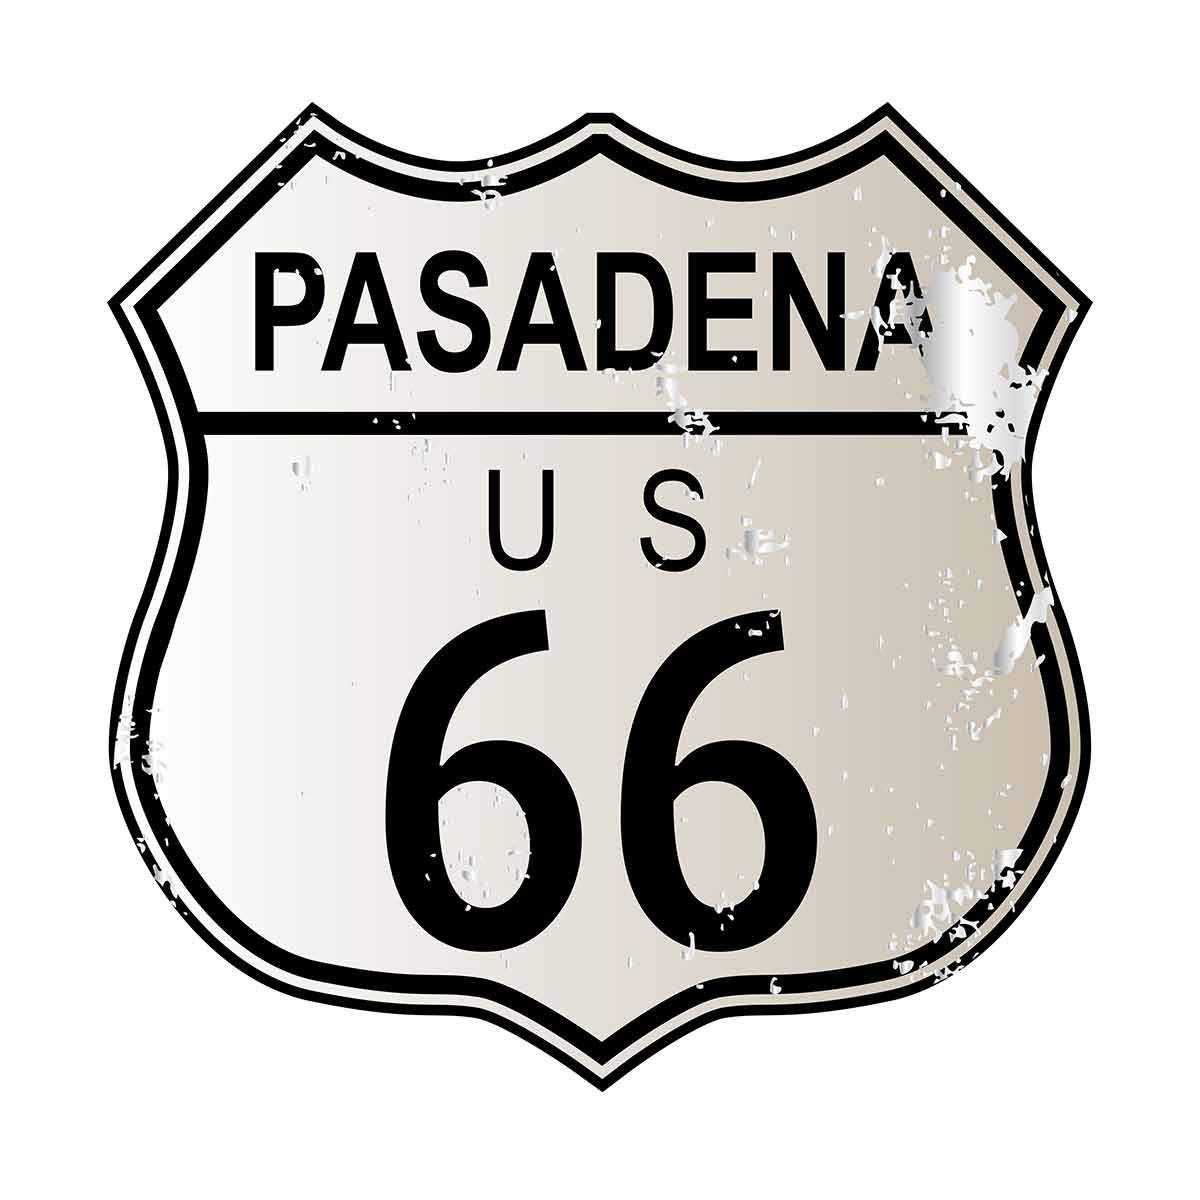 things to do in pasadena california Pasadena Route 66 traffic sign over a white background and the legend ROUTE US 66.